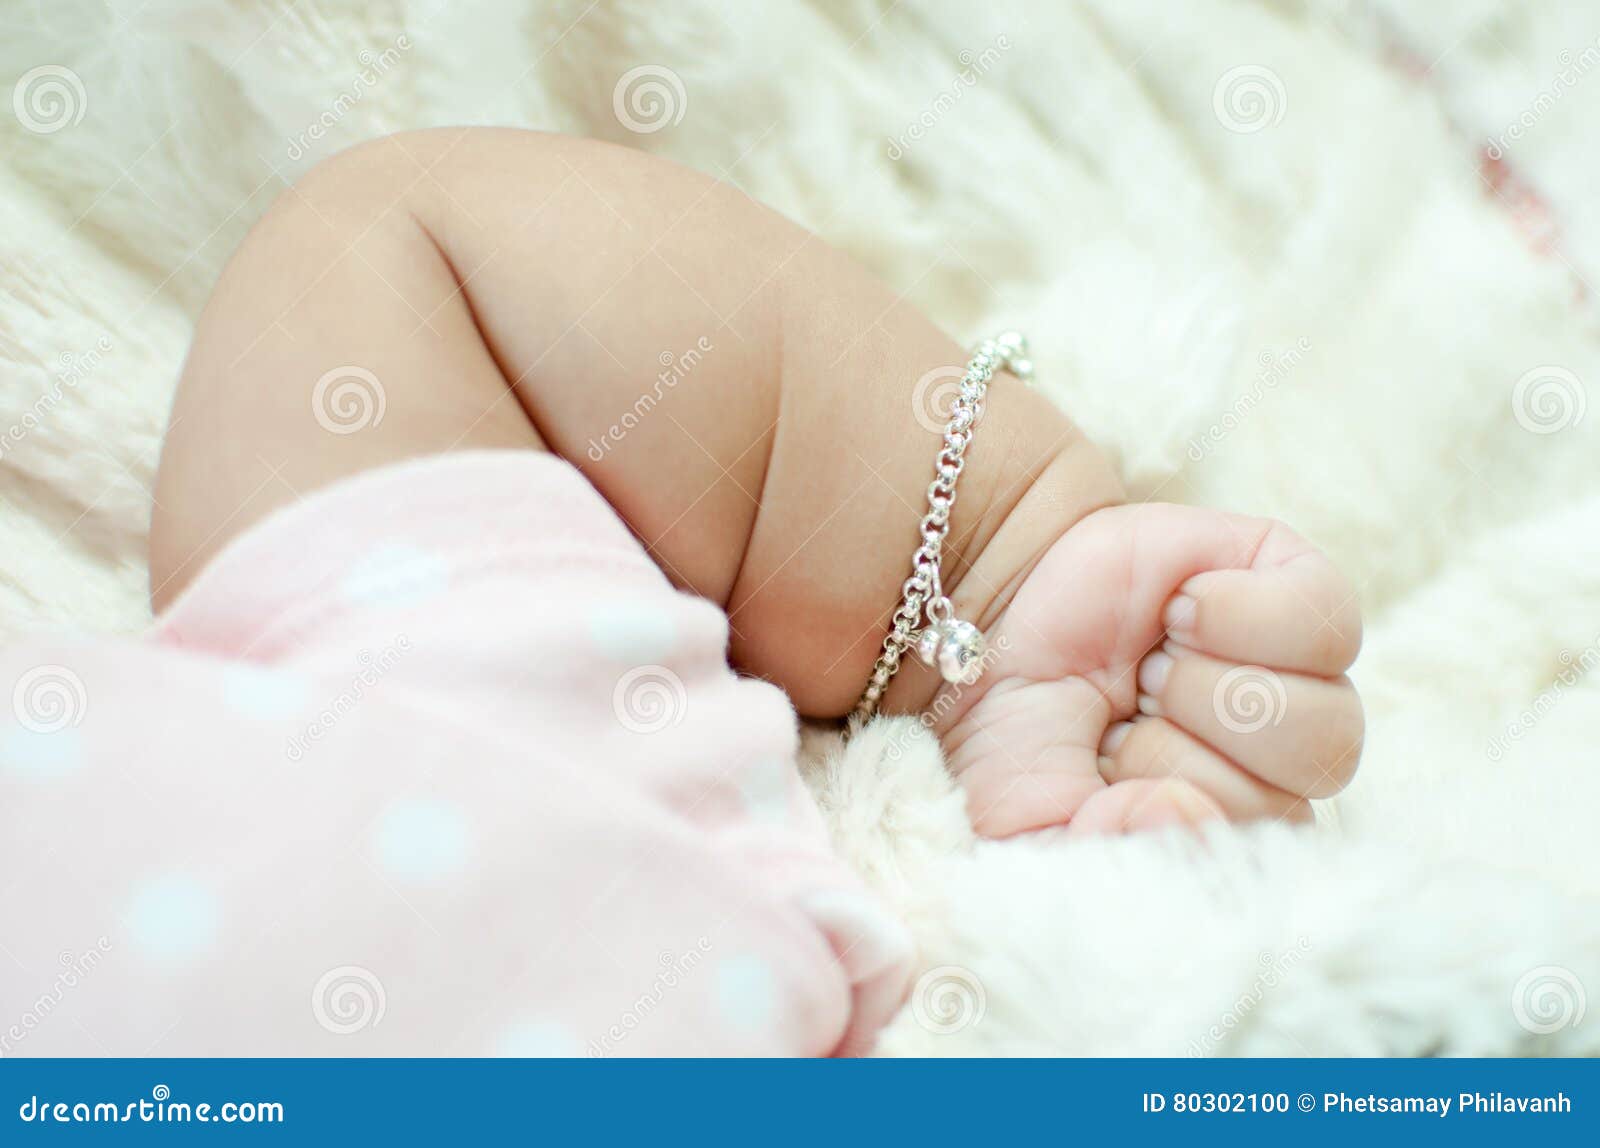 Hand Baby Girl Laying on Bed Stock Photo - Image of lovely, happy: 80302100